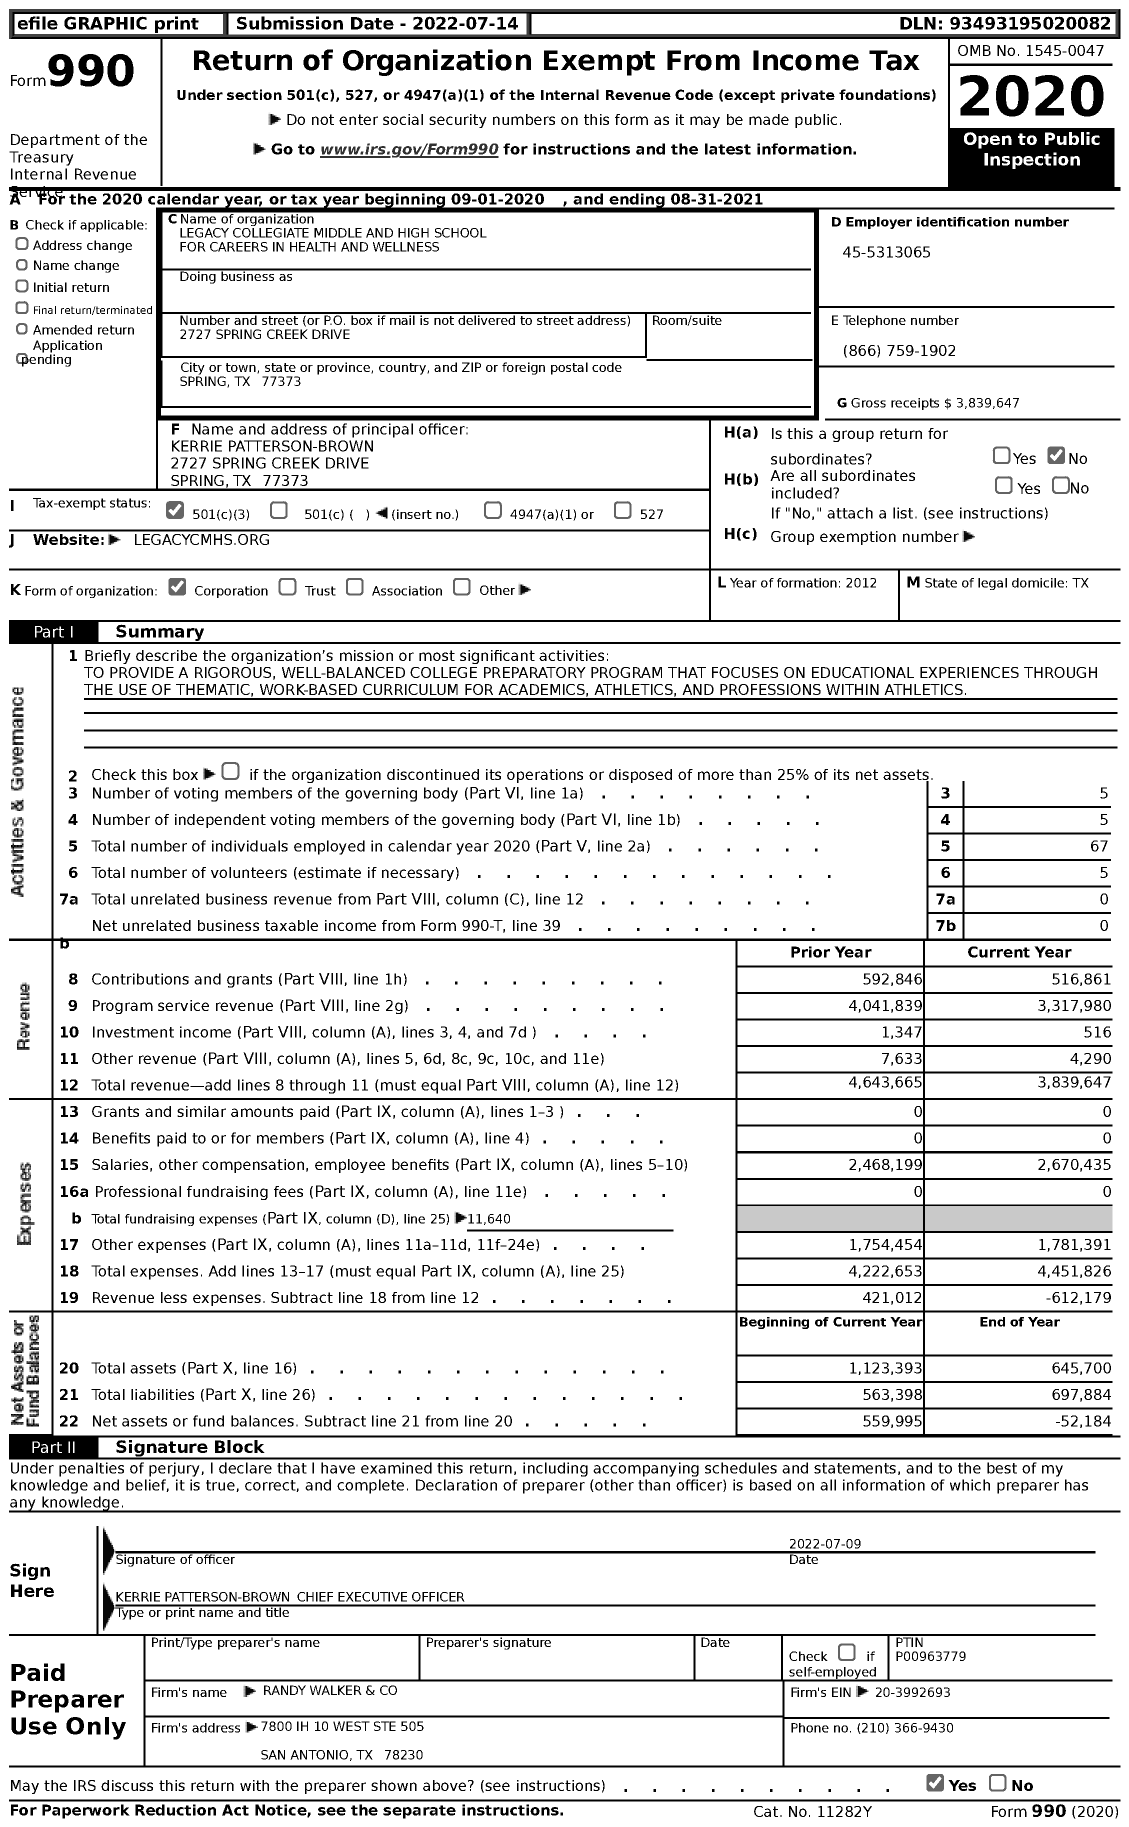 Image of first page of 2020 Form 990 for Legacy Collegiate Middle and High School for Careers in Health and Wellness